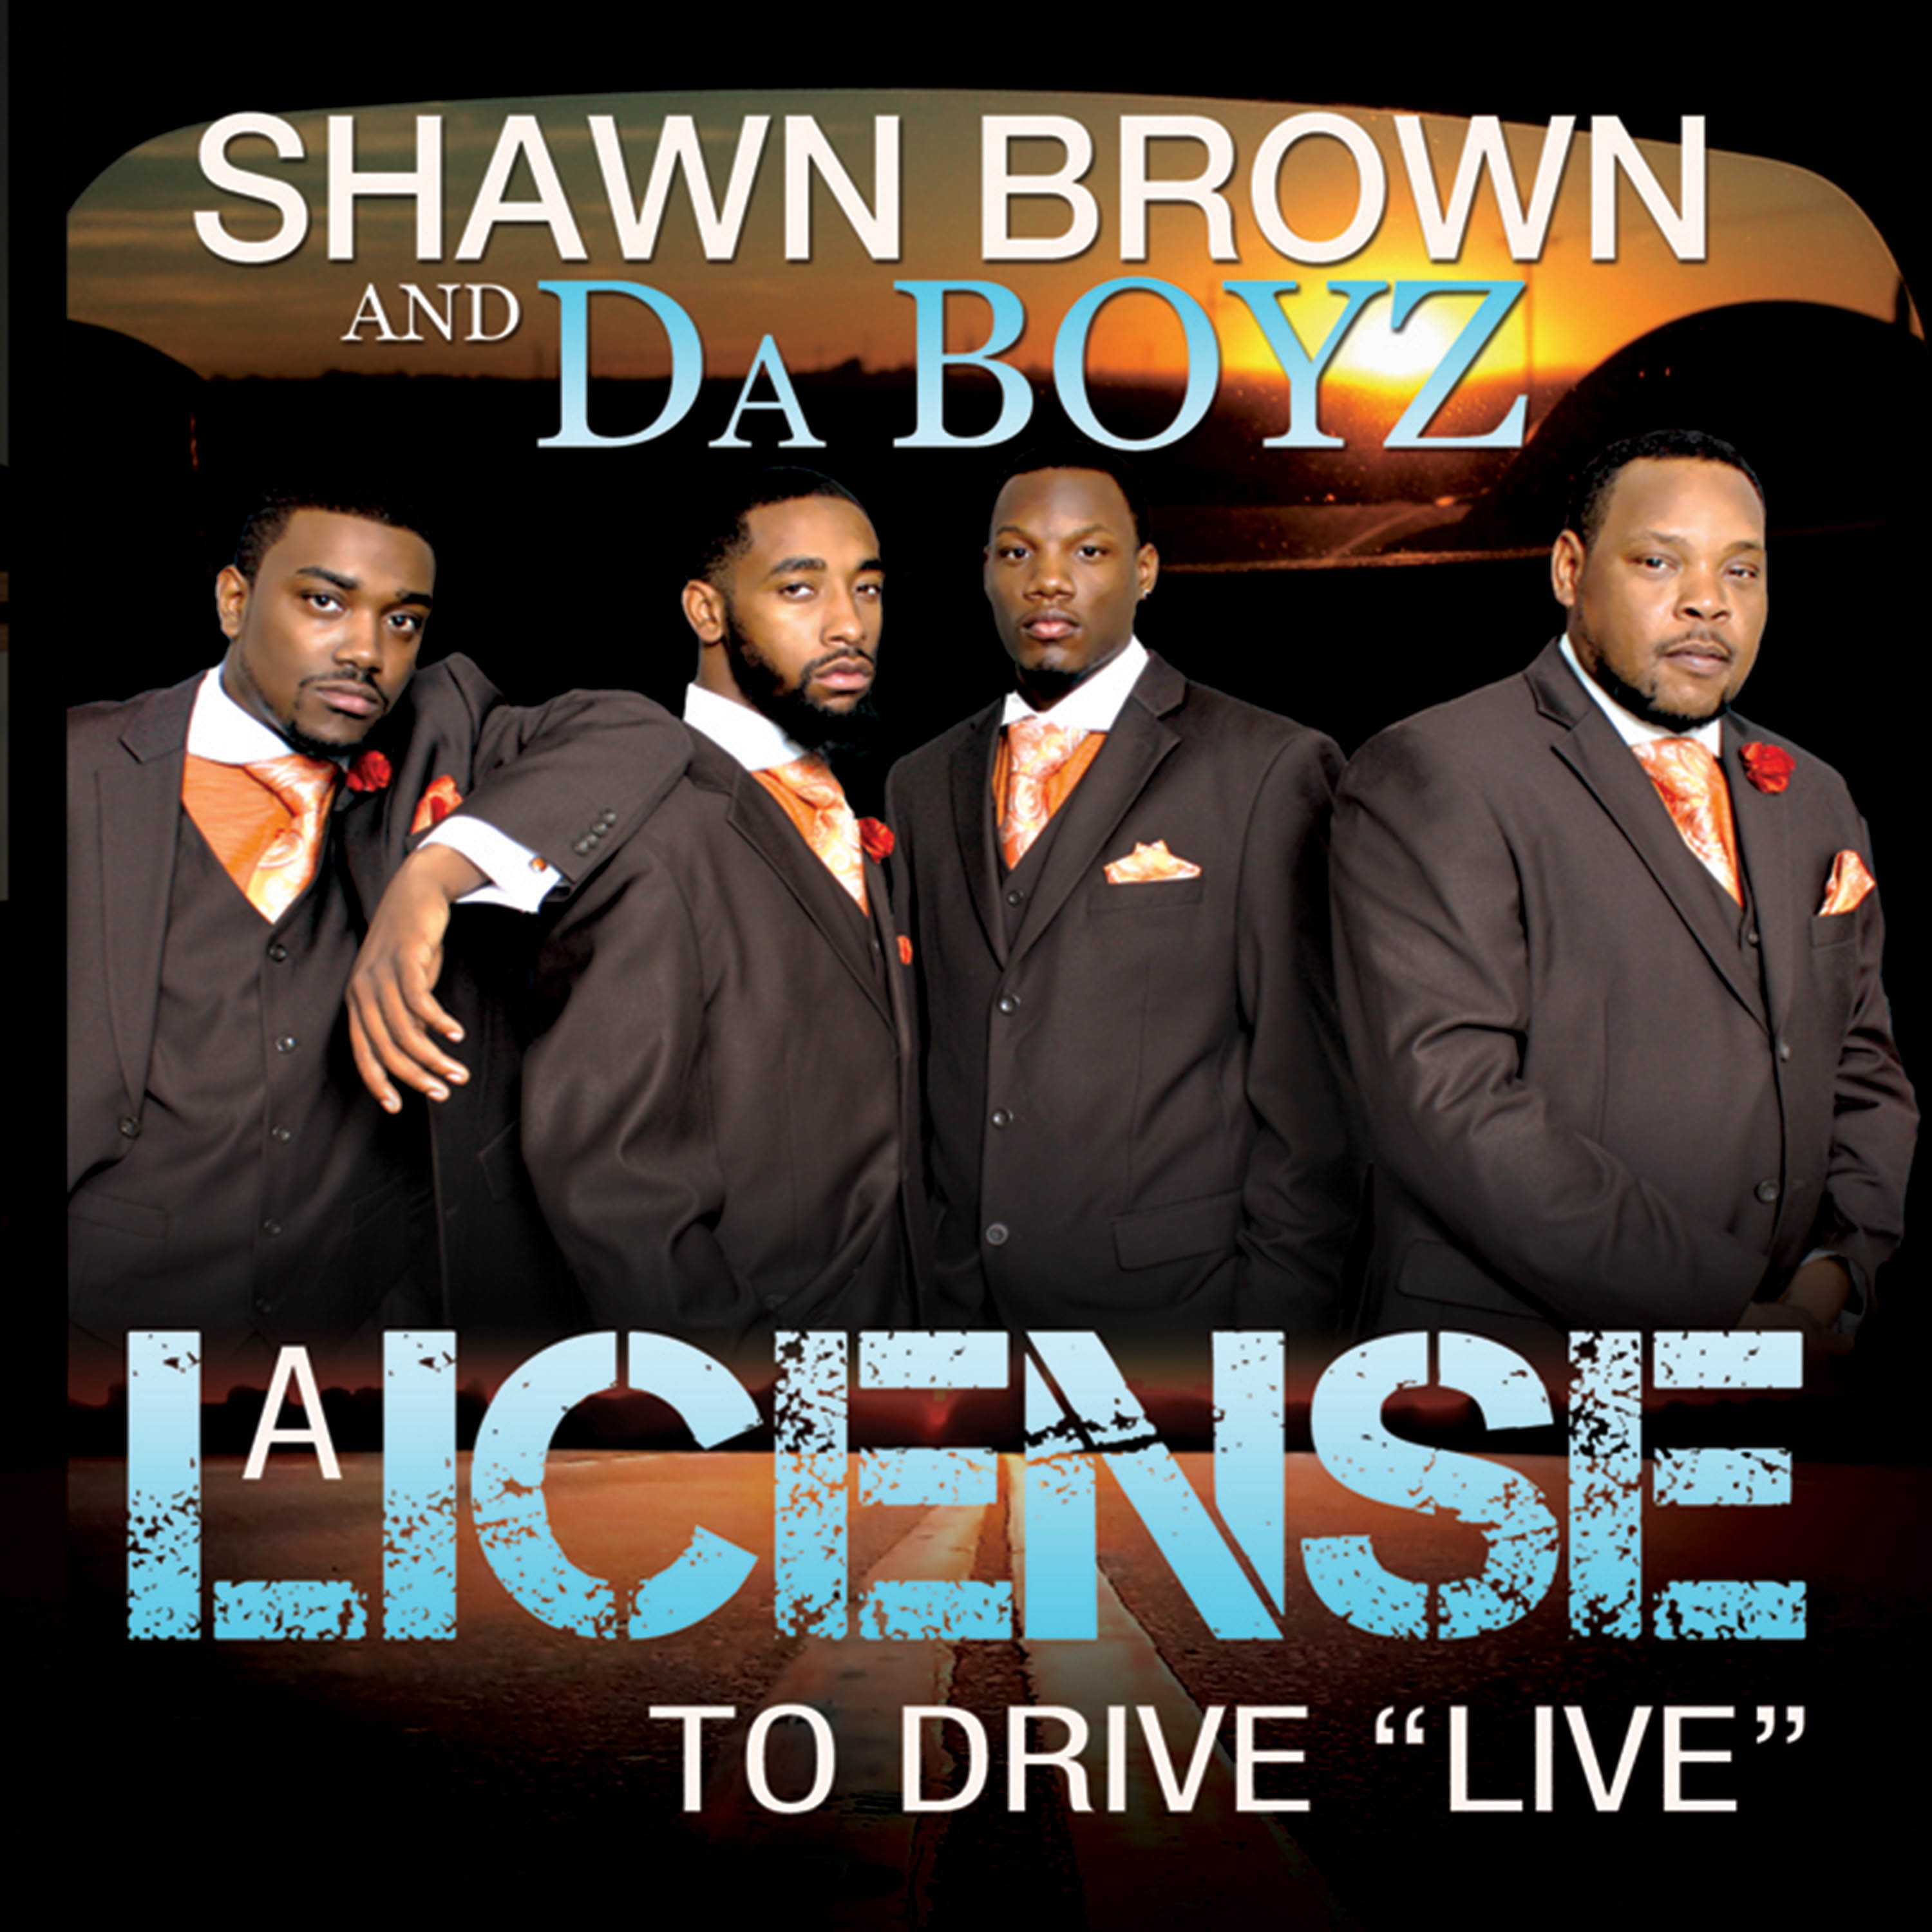 A License To Drive 'Live'